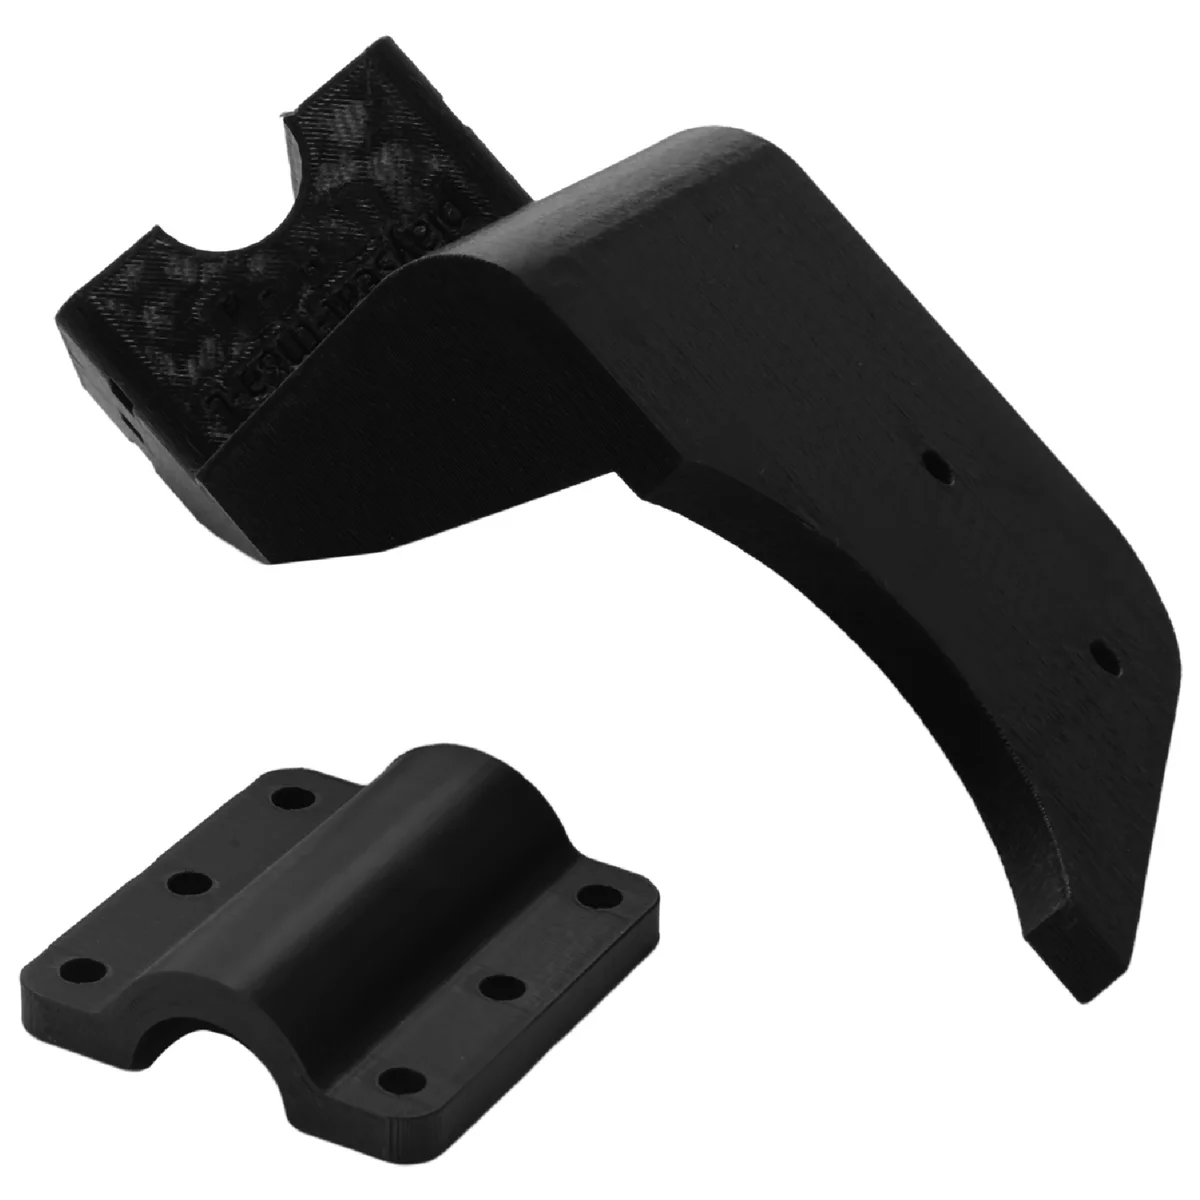 

High Quality Left Hand Shifter Knob Adapter Bracket for Thrustmaster TH8A Playseat Challenge Modification Accessories